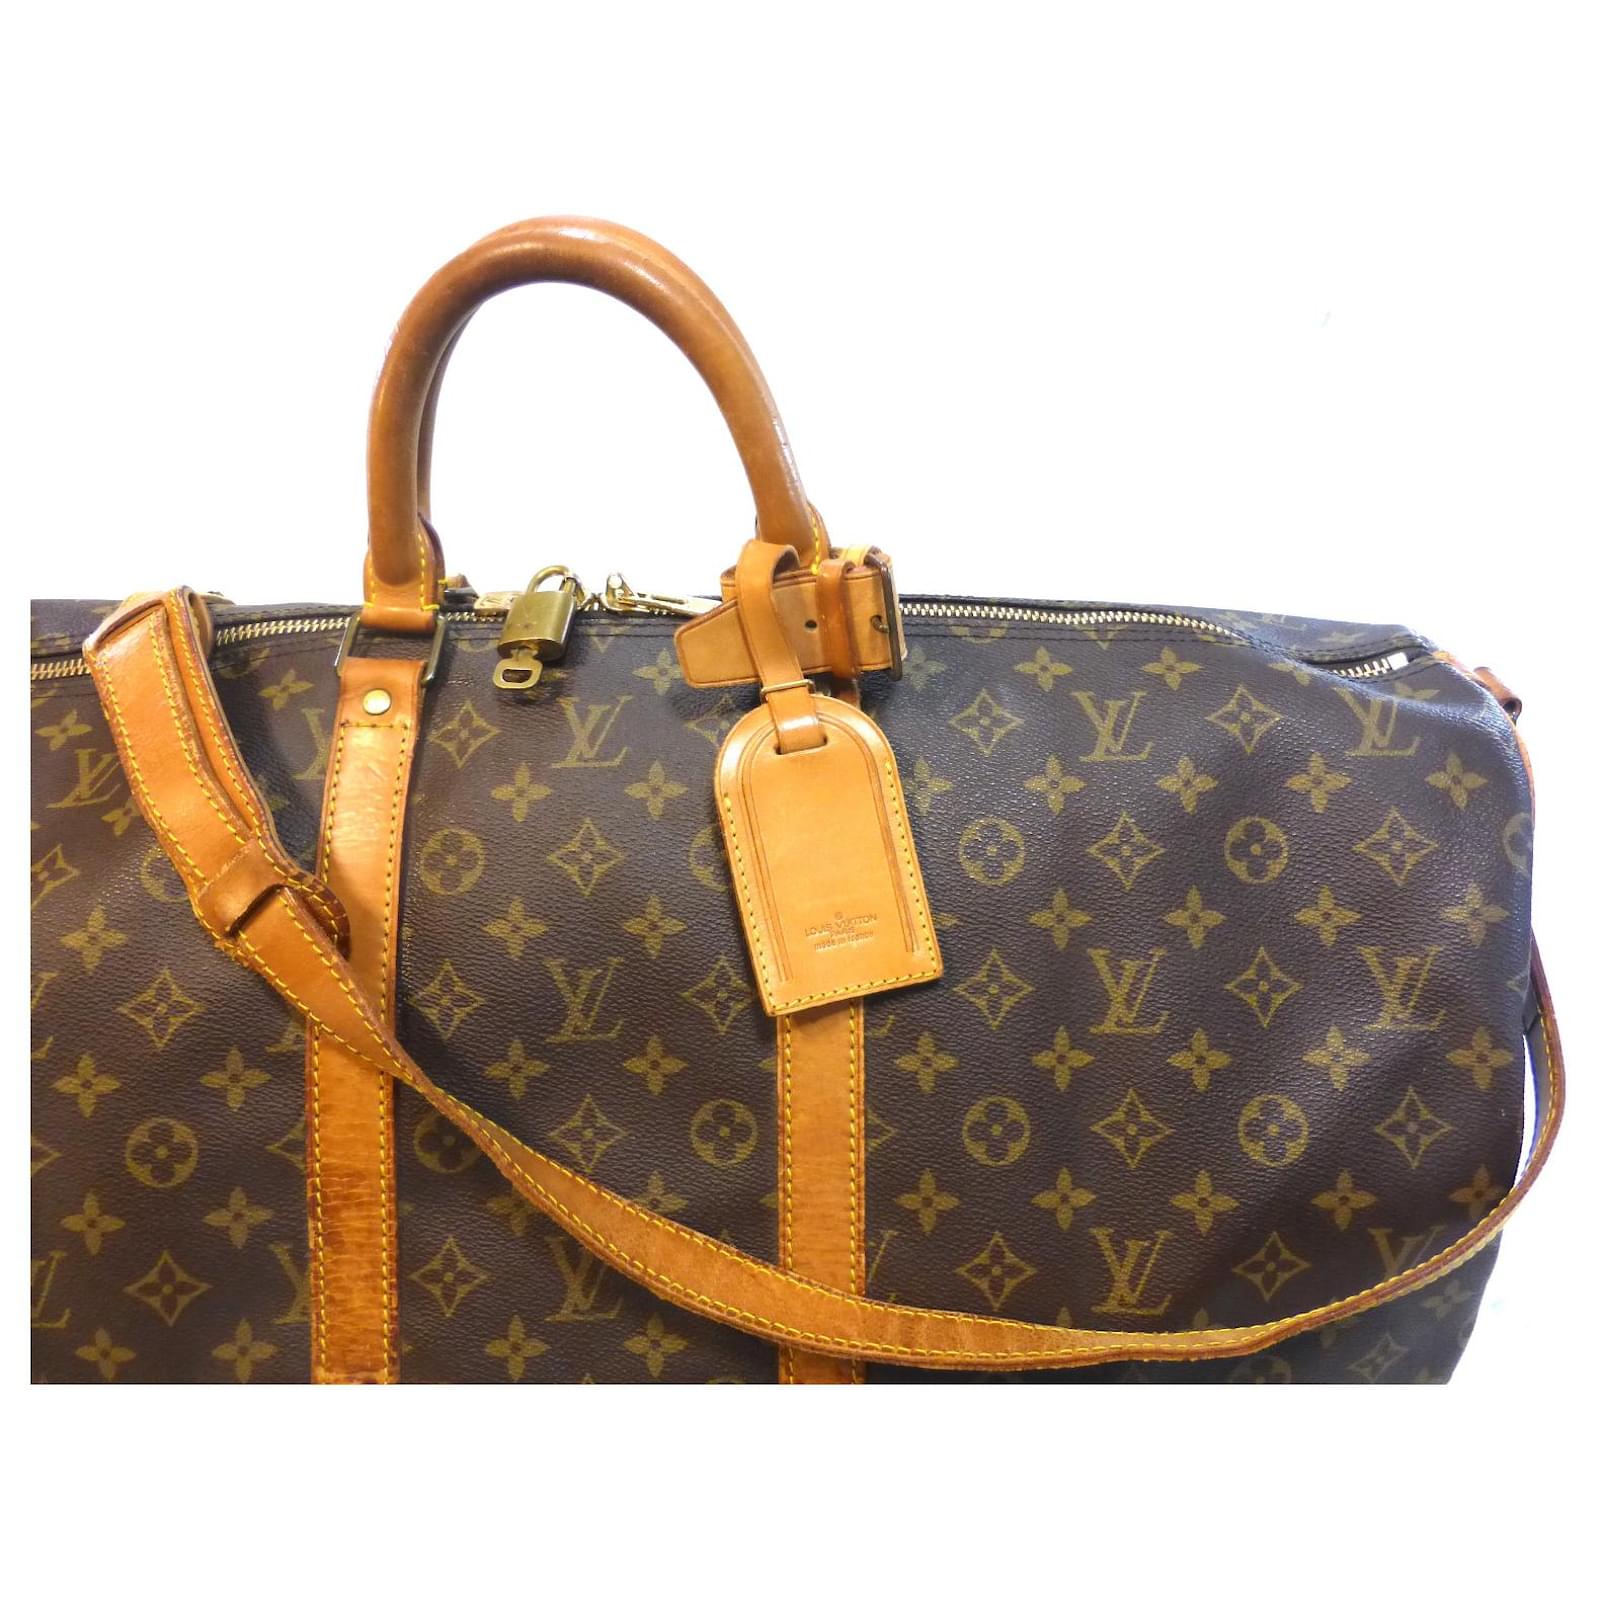 Louis Vuitton Pre-owned Women's Leather Shoulder Bag - Yellow - One Size